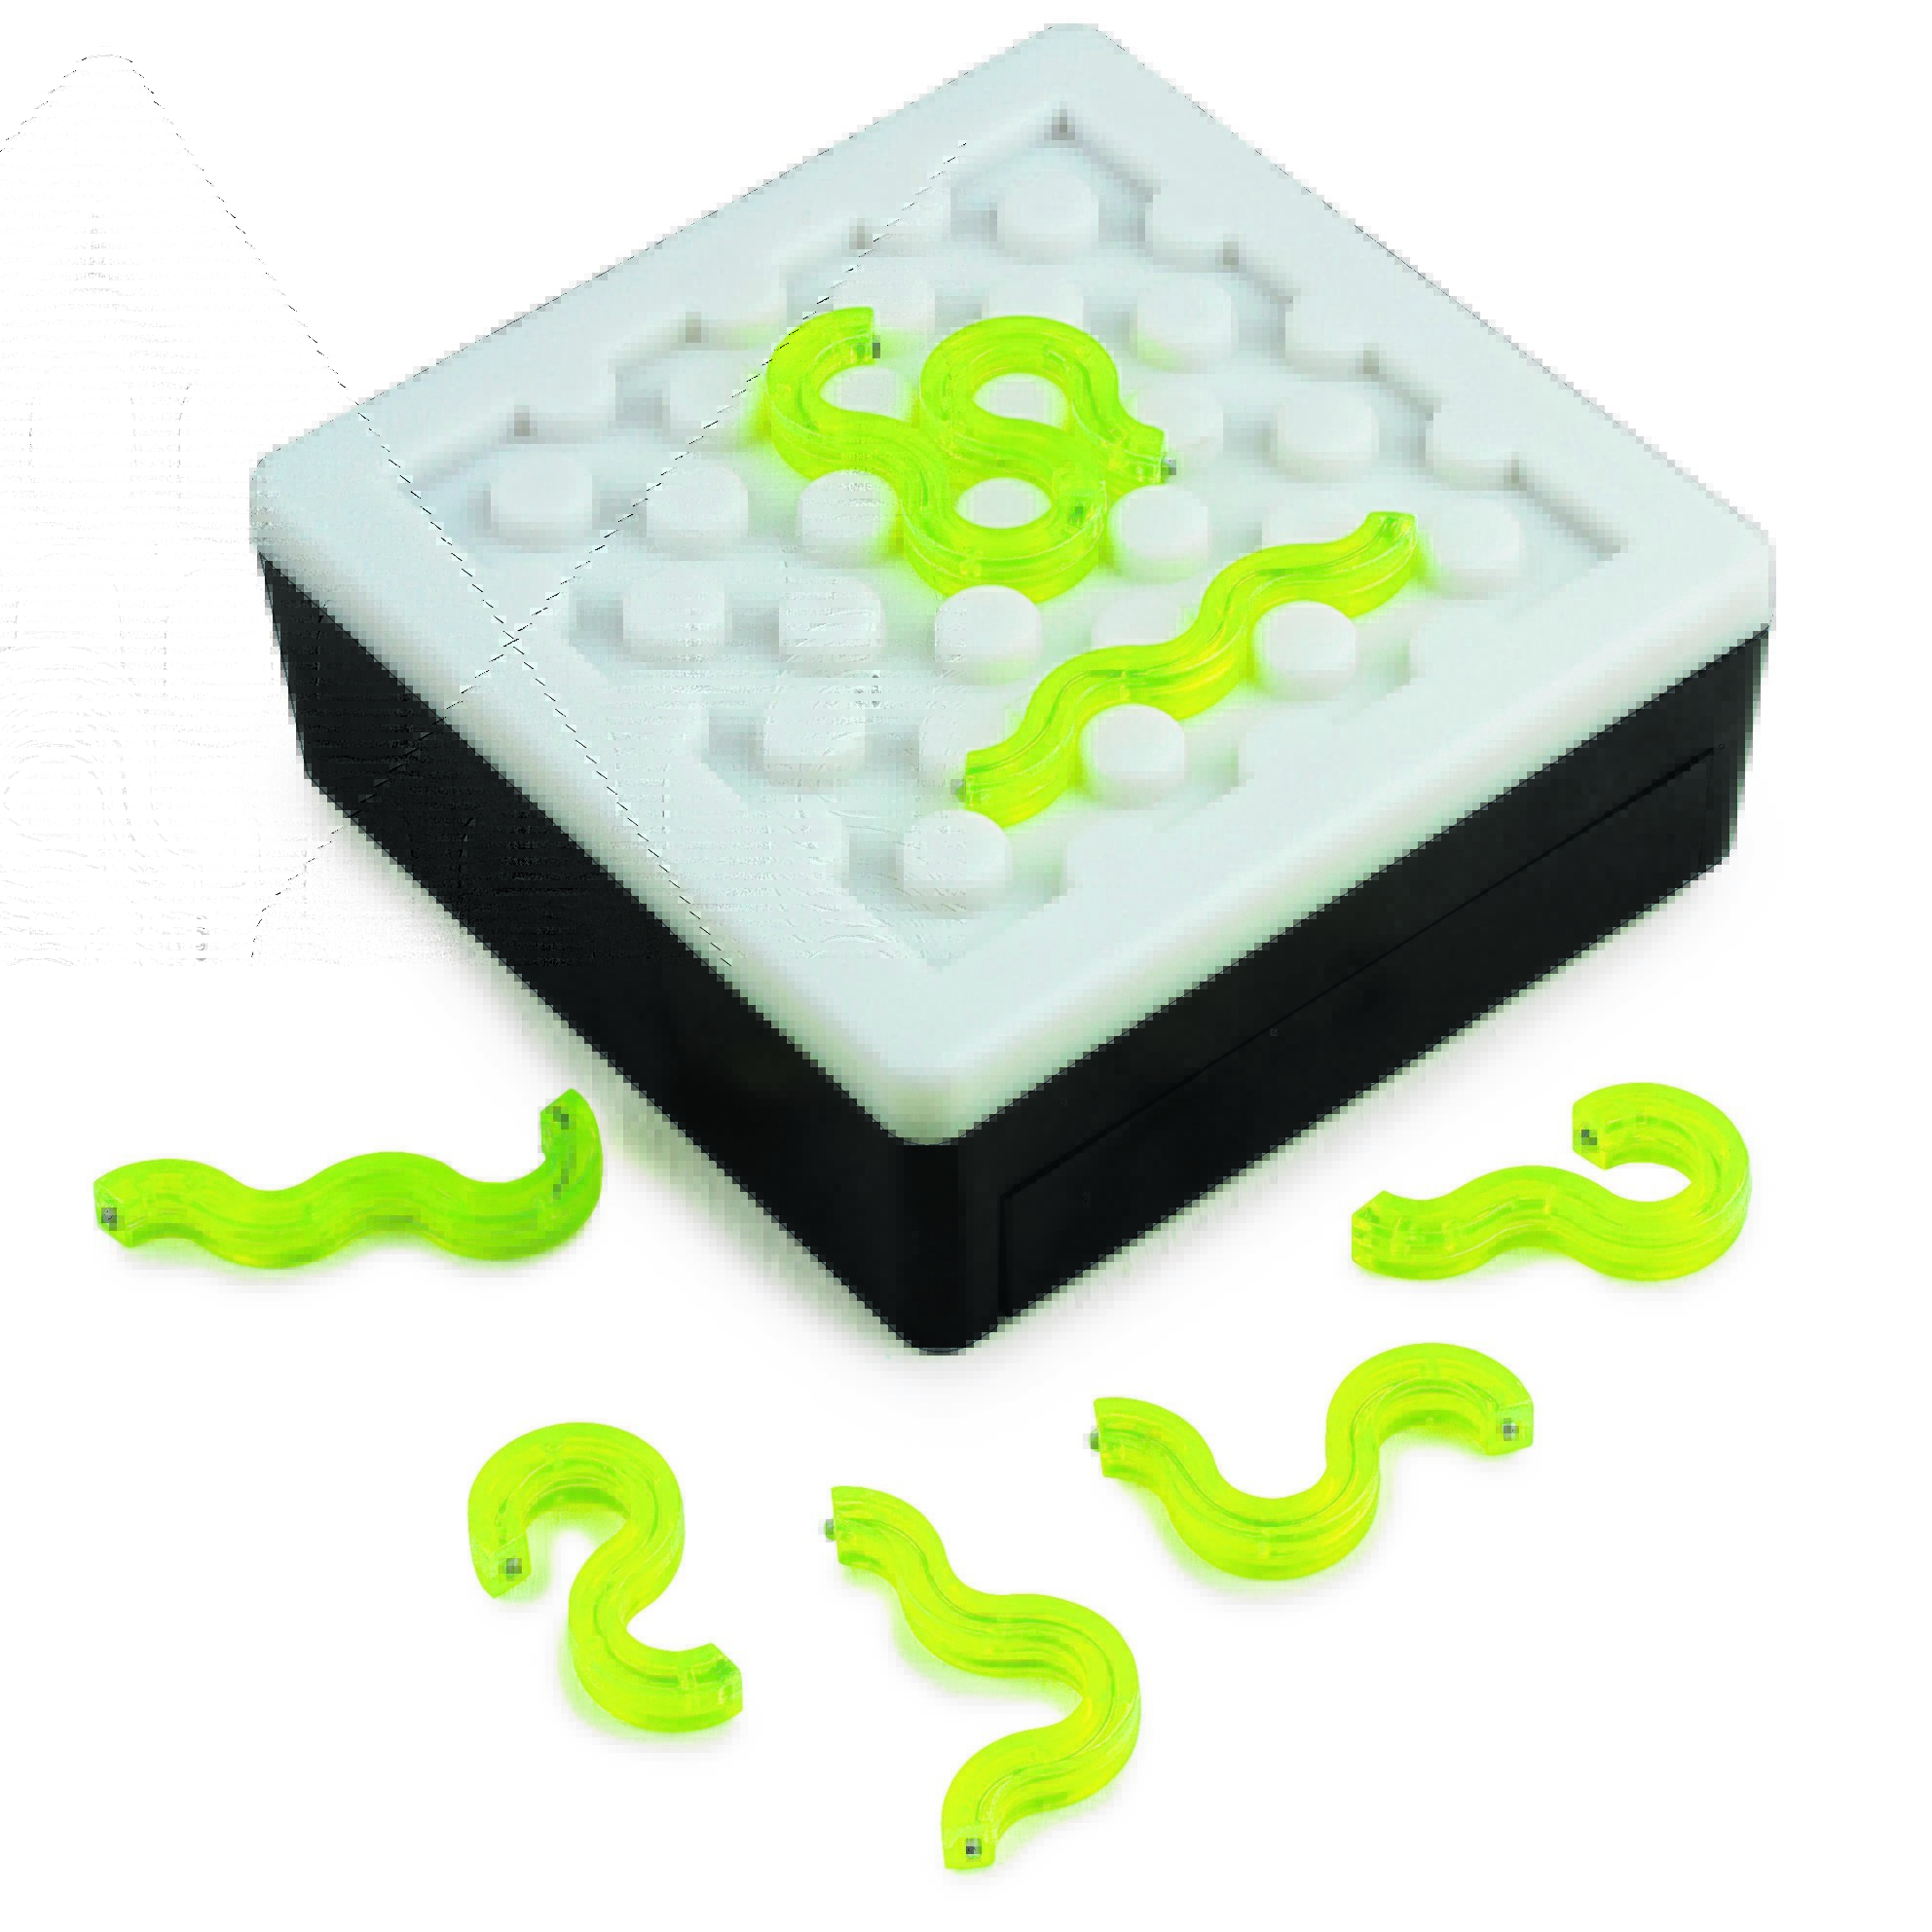 COOL CIRCUITS -
Suitable for those aged 8+, this is a lovely little game that will keep your attention. Requires 3xAAA batteries. £19.95 from www.prezzybox.com